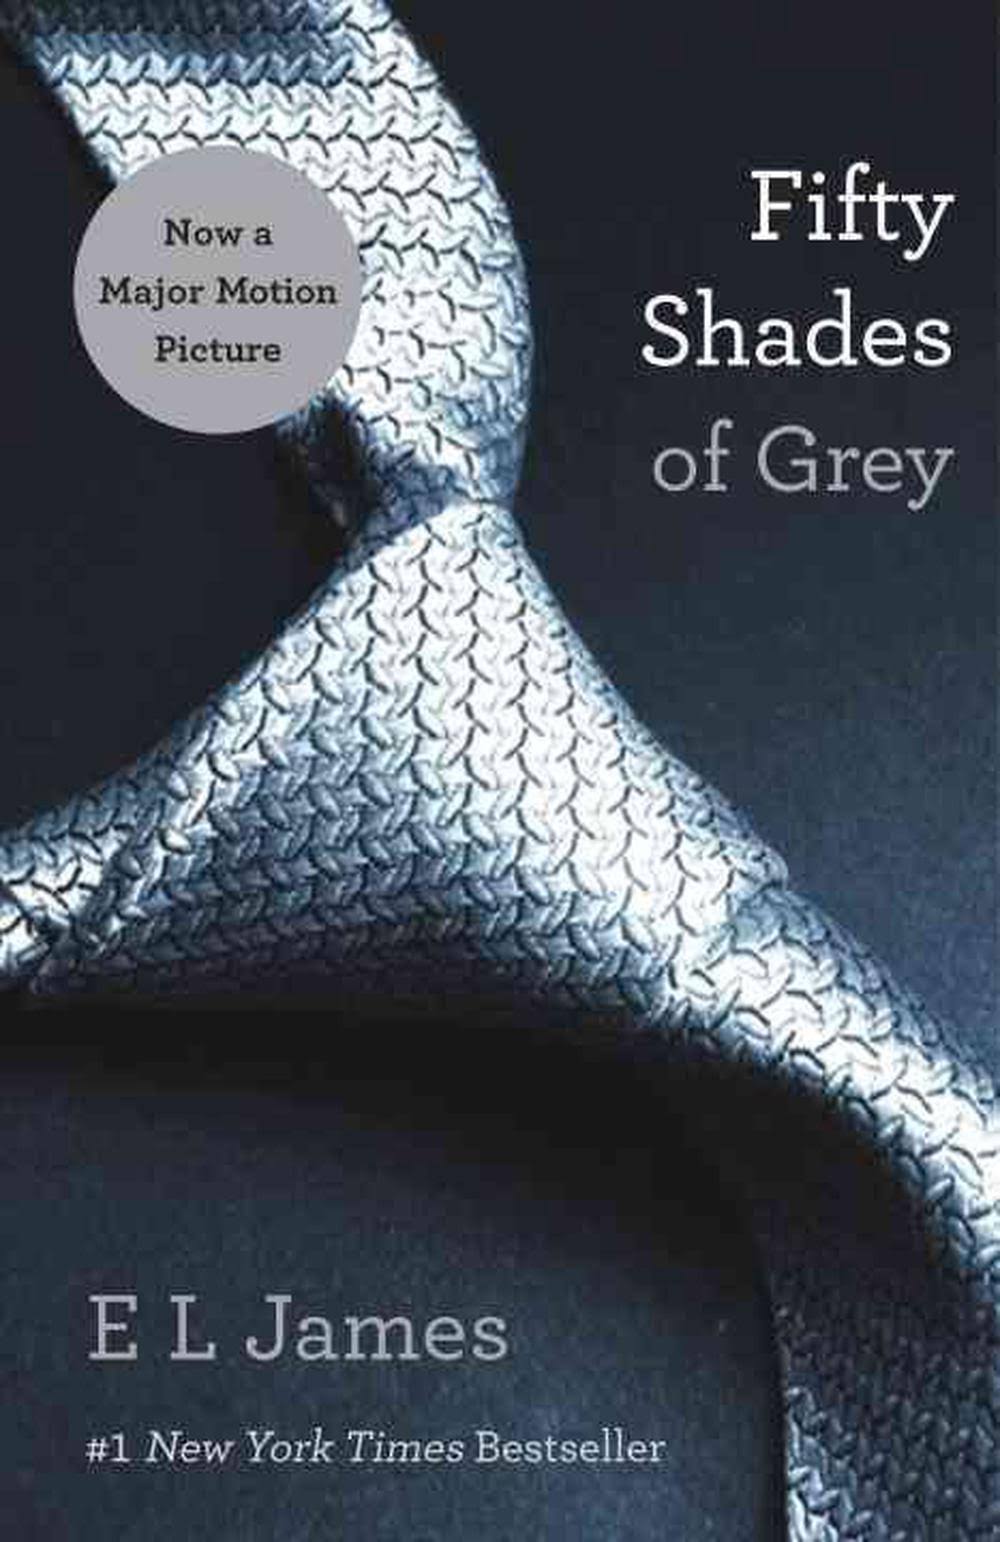 Fifty Shades of Grey by James E. L